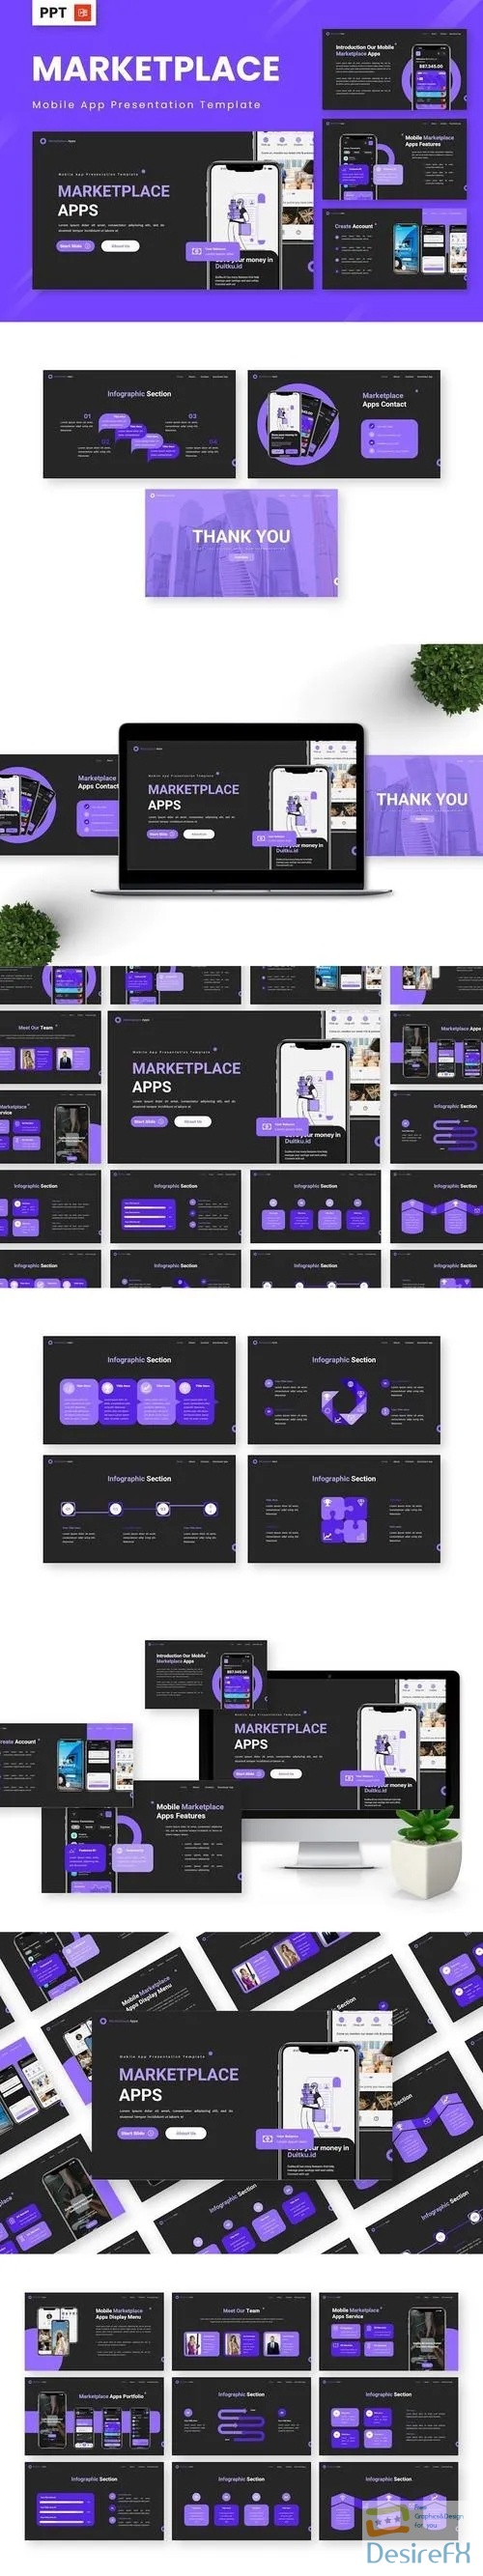 Marketplace Apps - Mobile App Powerpoint Templates